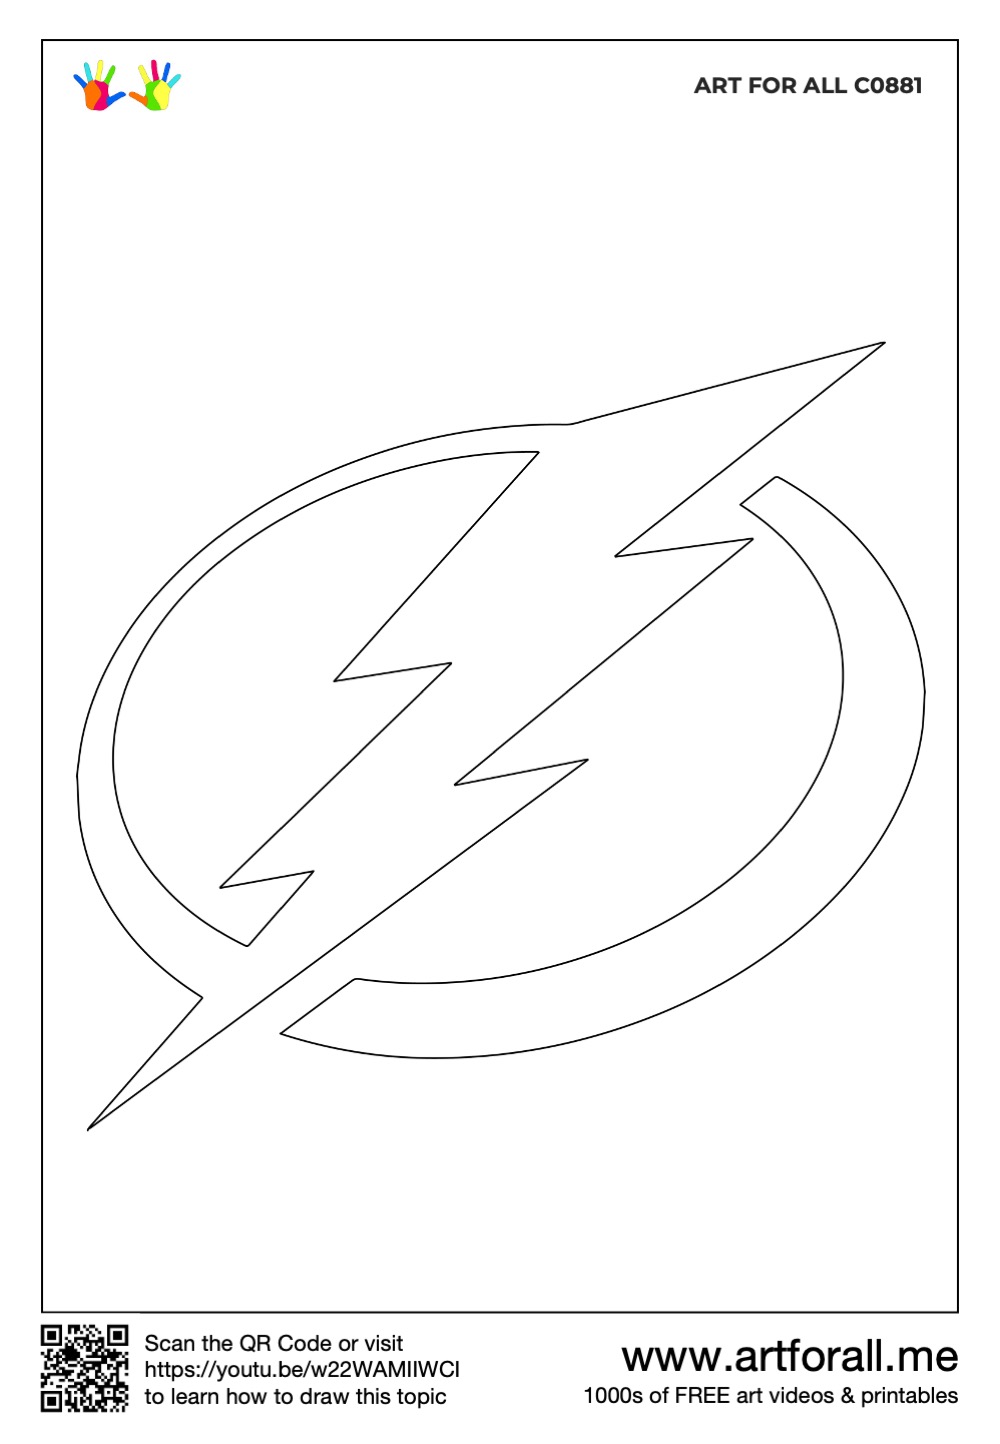 How to draw the tampa bay lightning logo